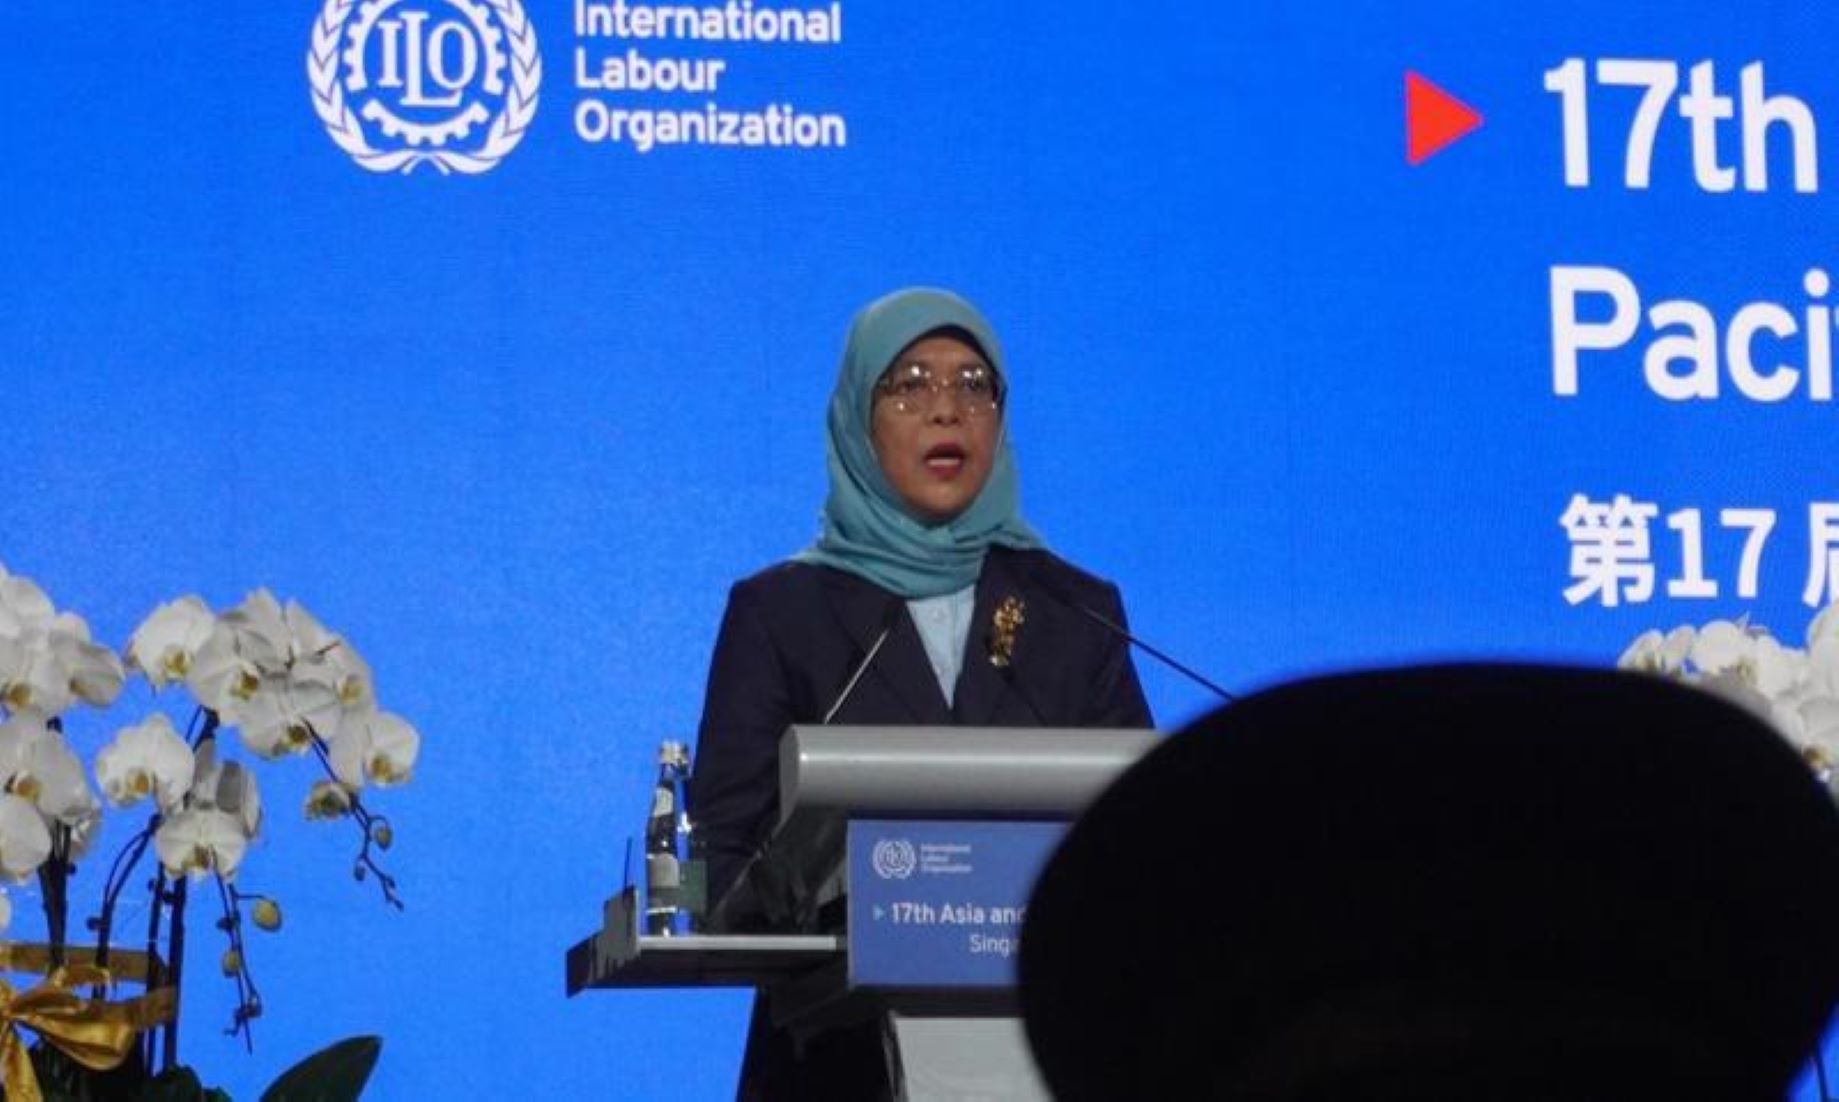 ILO Asia-Pacific Meeting Focuses On Employment, Future Of Work